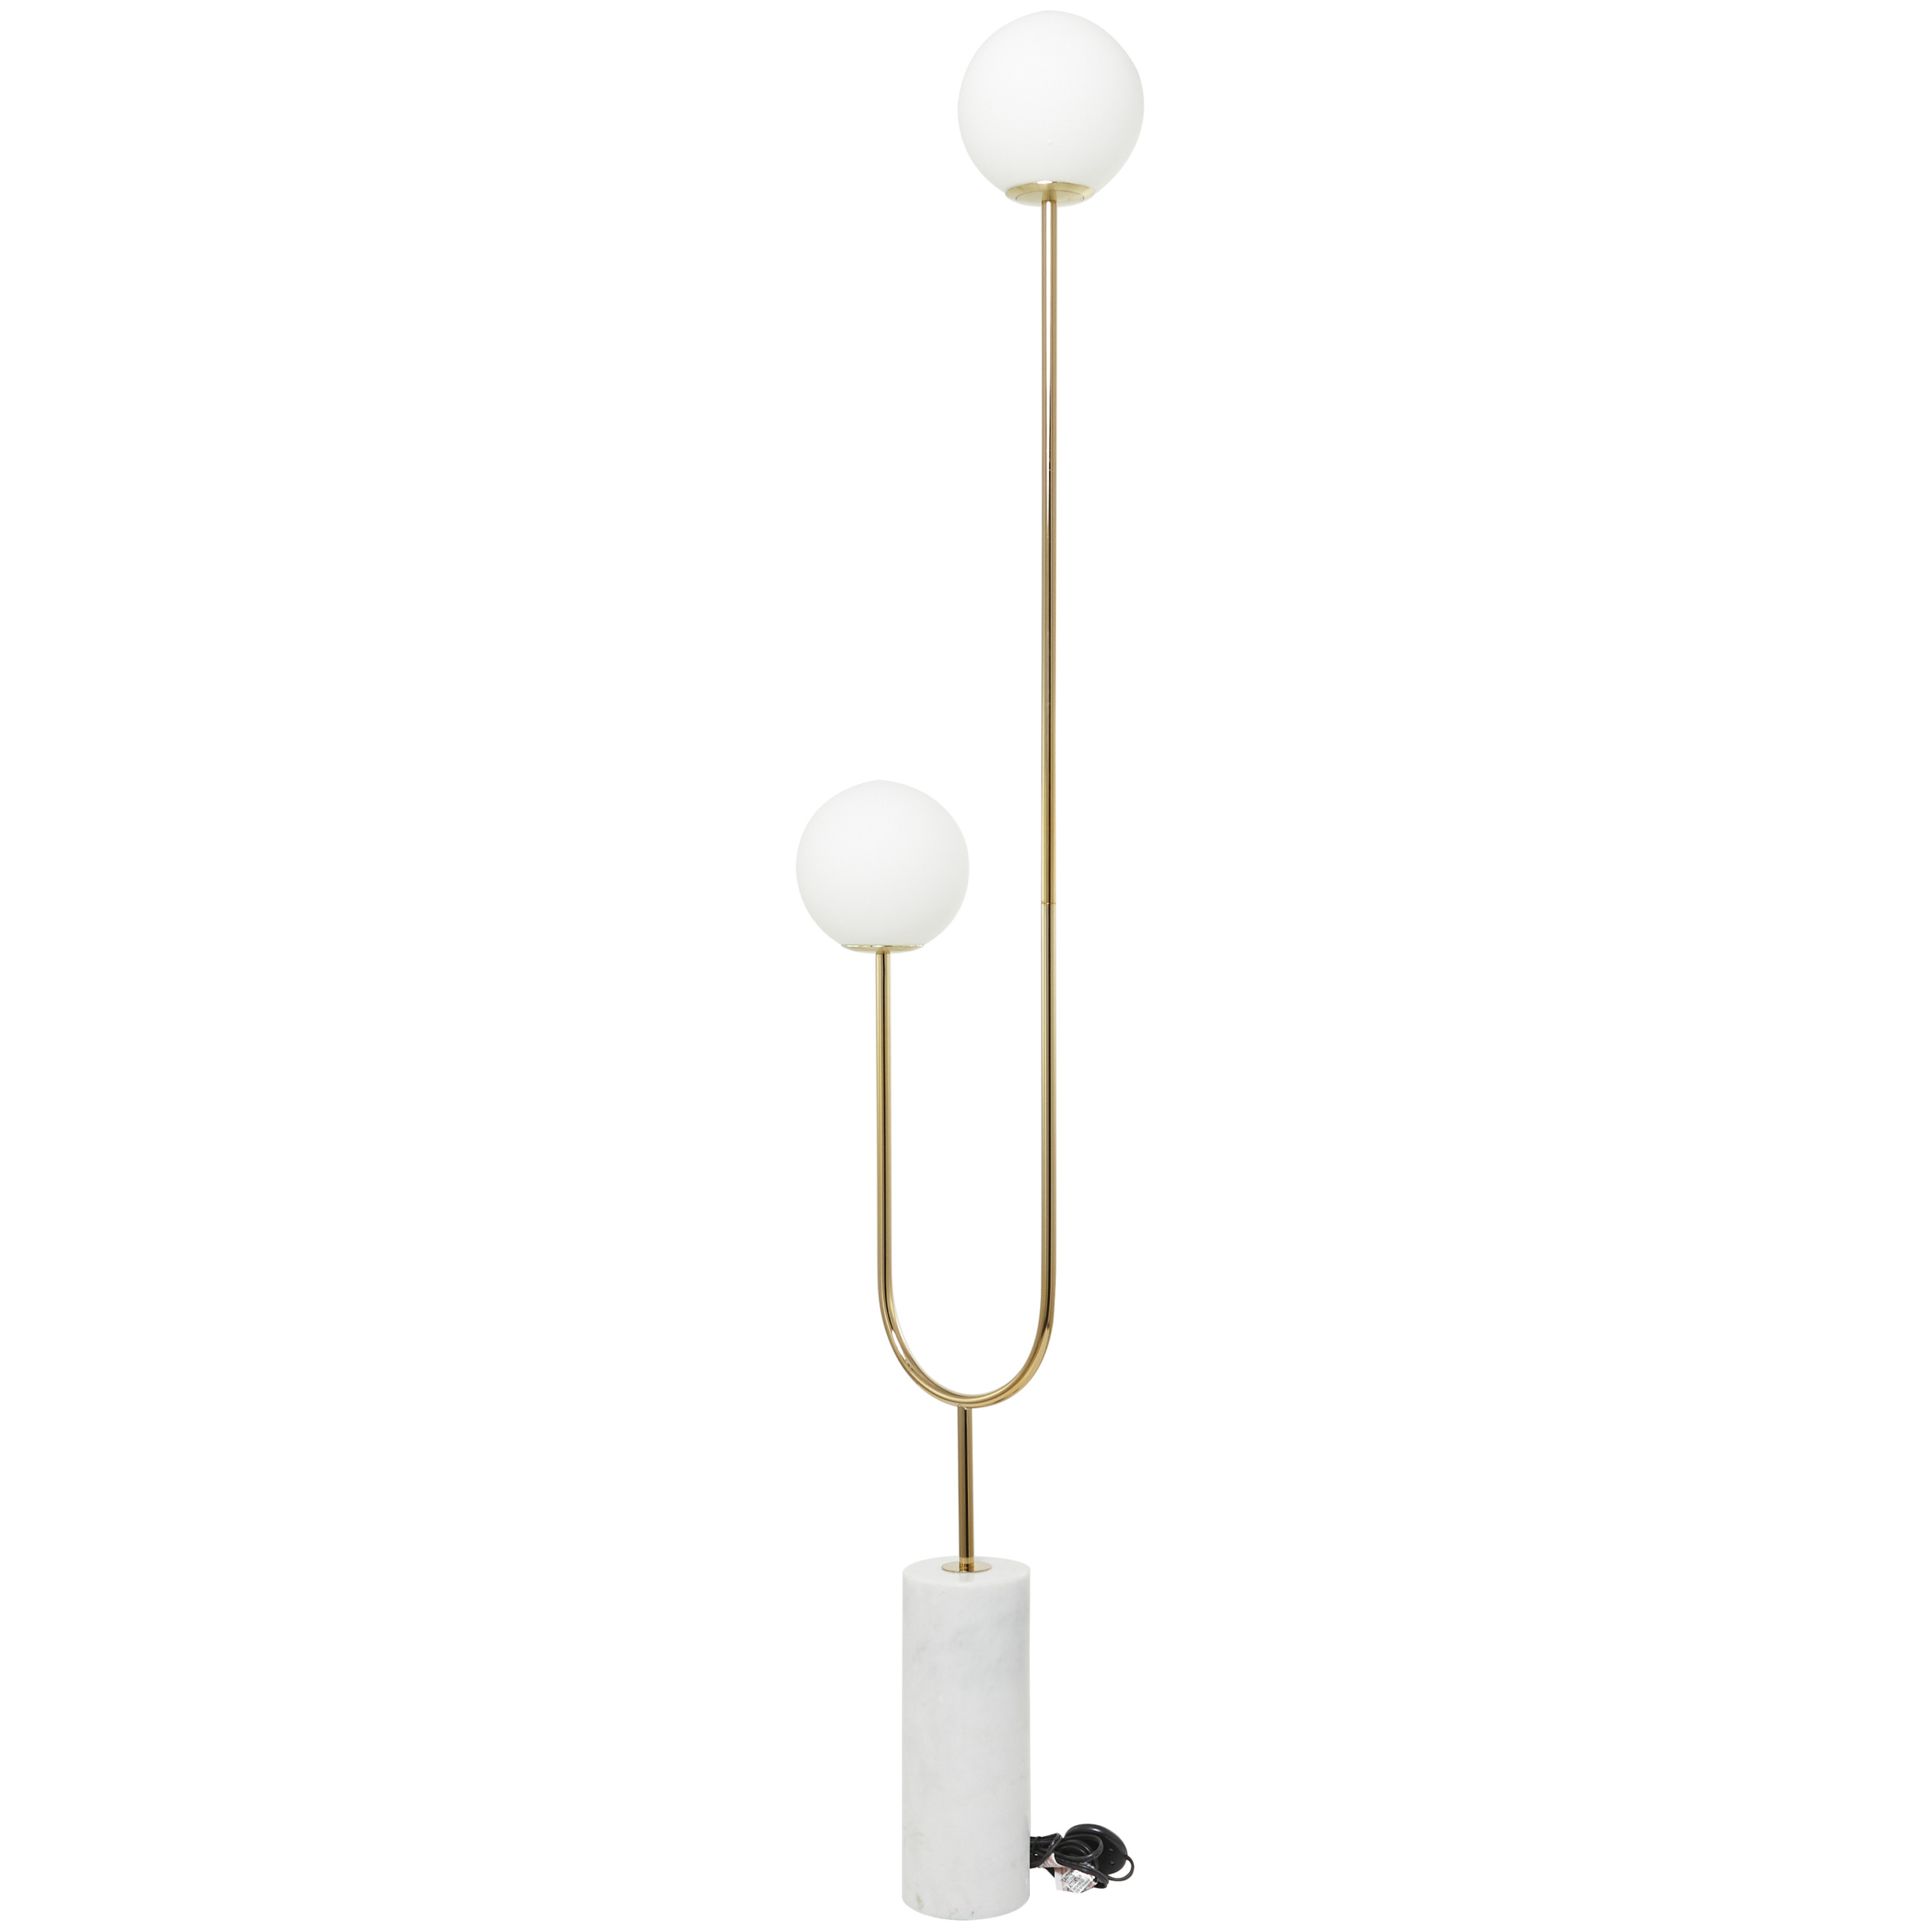 DecMode 73" 2 Light Orb Gold Floor Lamp with White Glass Shade - image 7 of 9